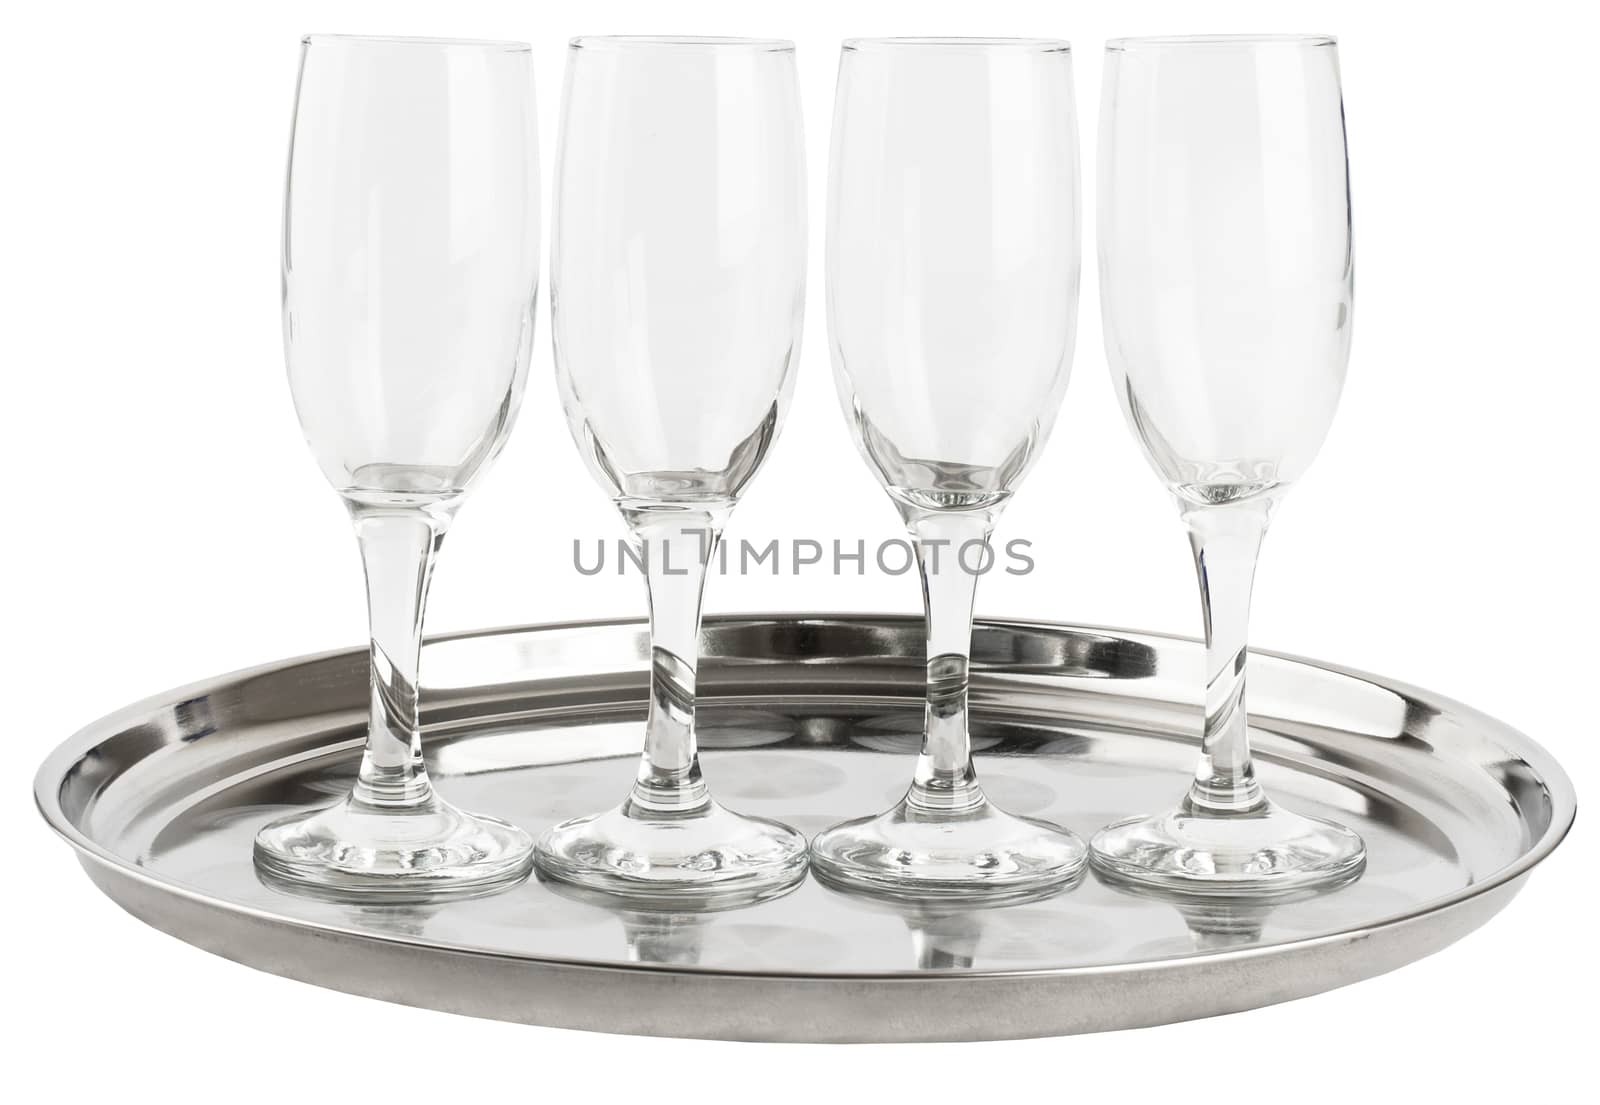 Many champagne glasses on tray by cherezoff